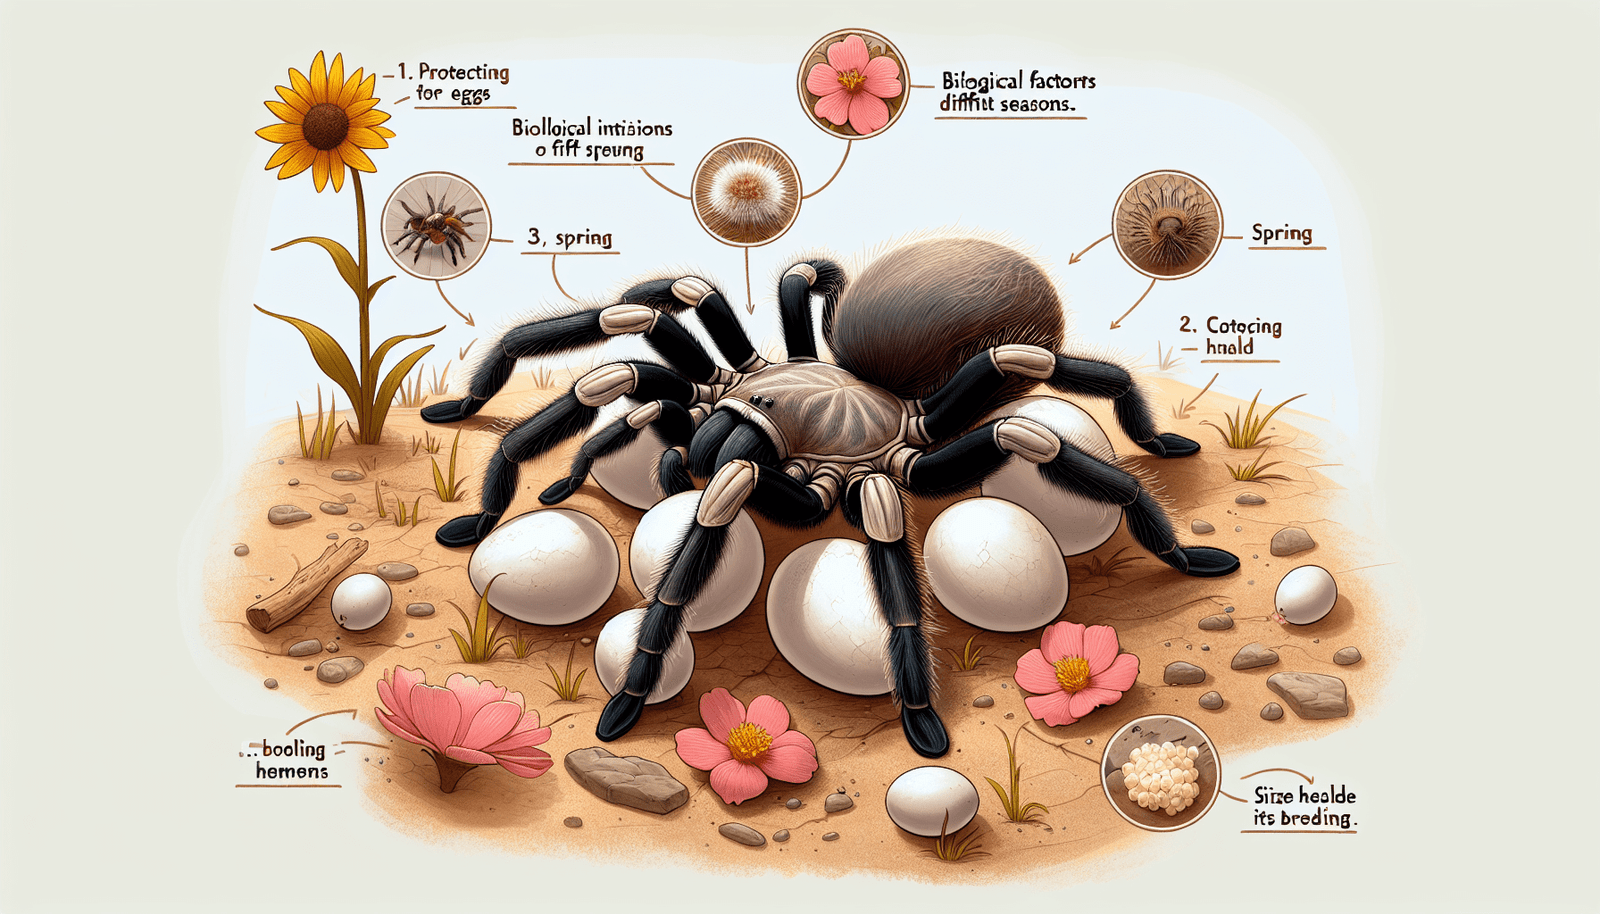 Can Tarantulas Be Bred Year-round, Or Are There Specific Breeding Seasons?